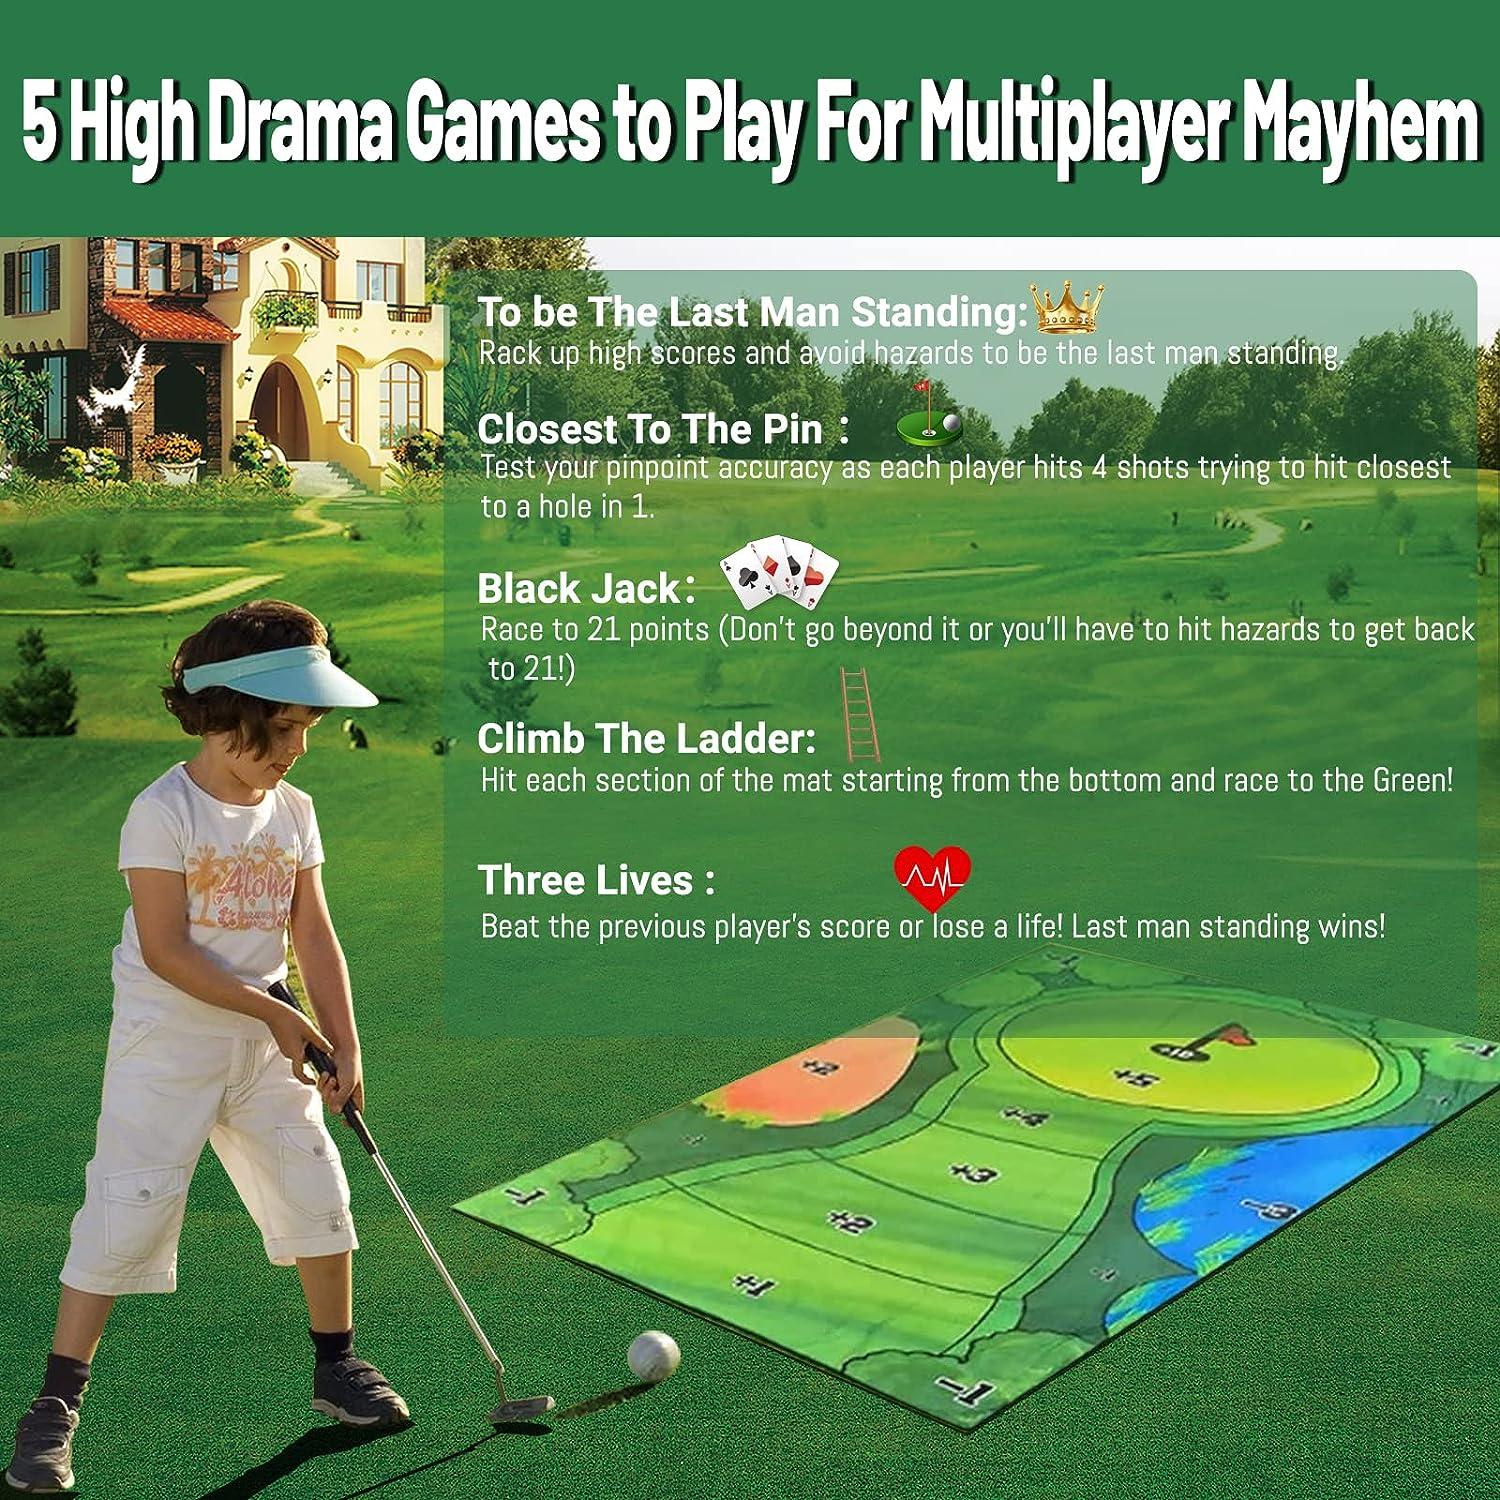  Casual Golf Game Set - Includes Golf Game Mat, 16 Golf Balls,  4 Stakes Available for Outdoor Use, Golf Chipping Mat, Carrying Bag-Mini  Golf Course, Golf Training Aid Equipment for